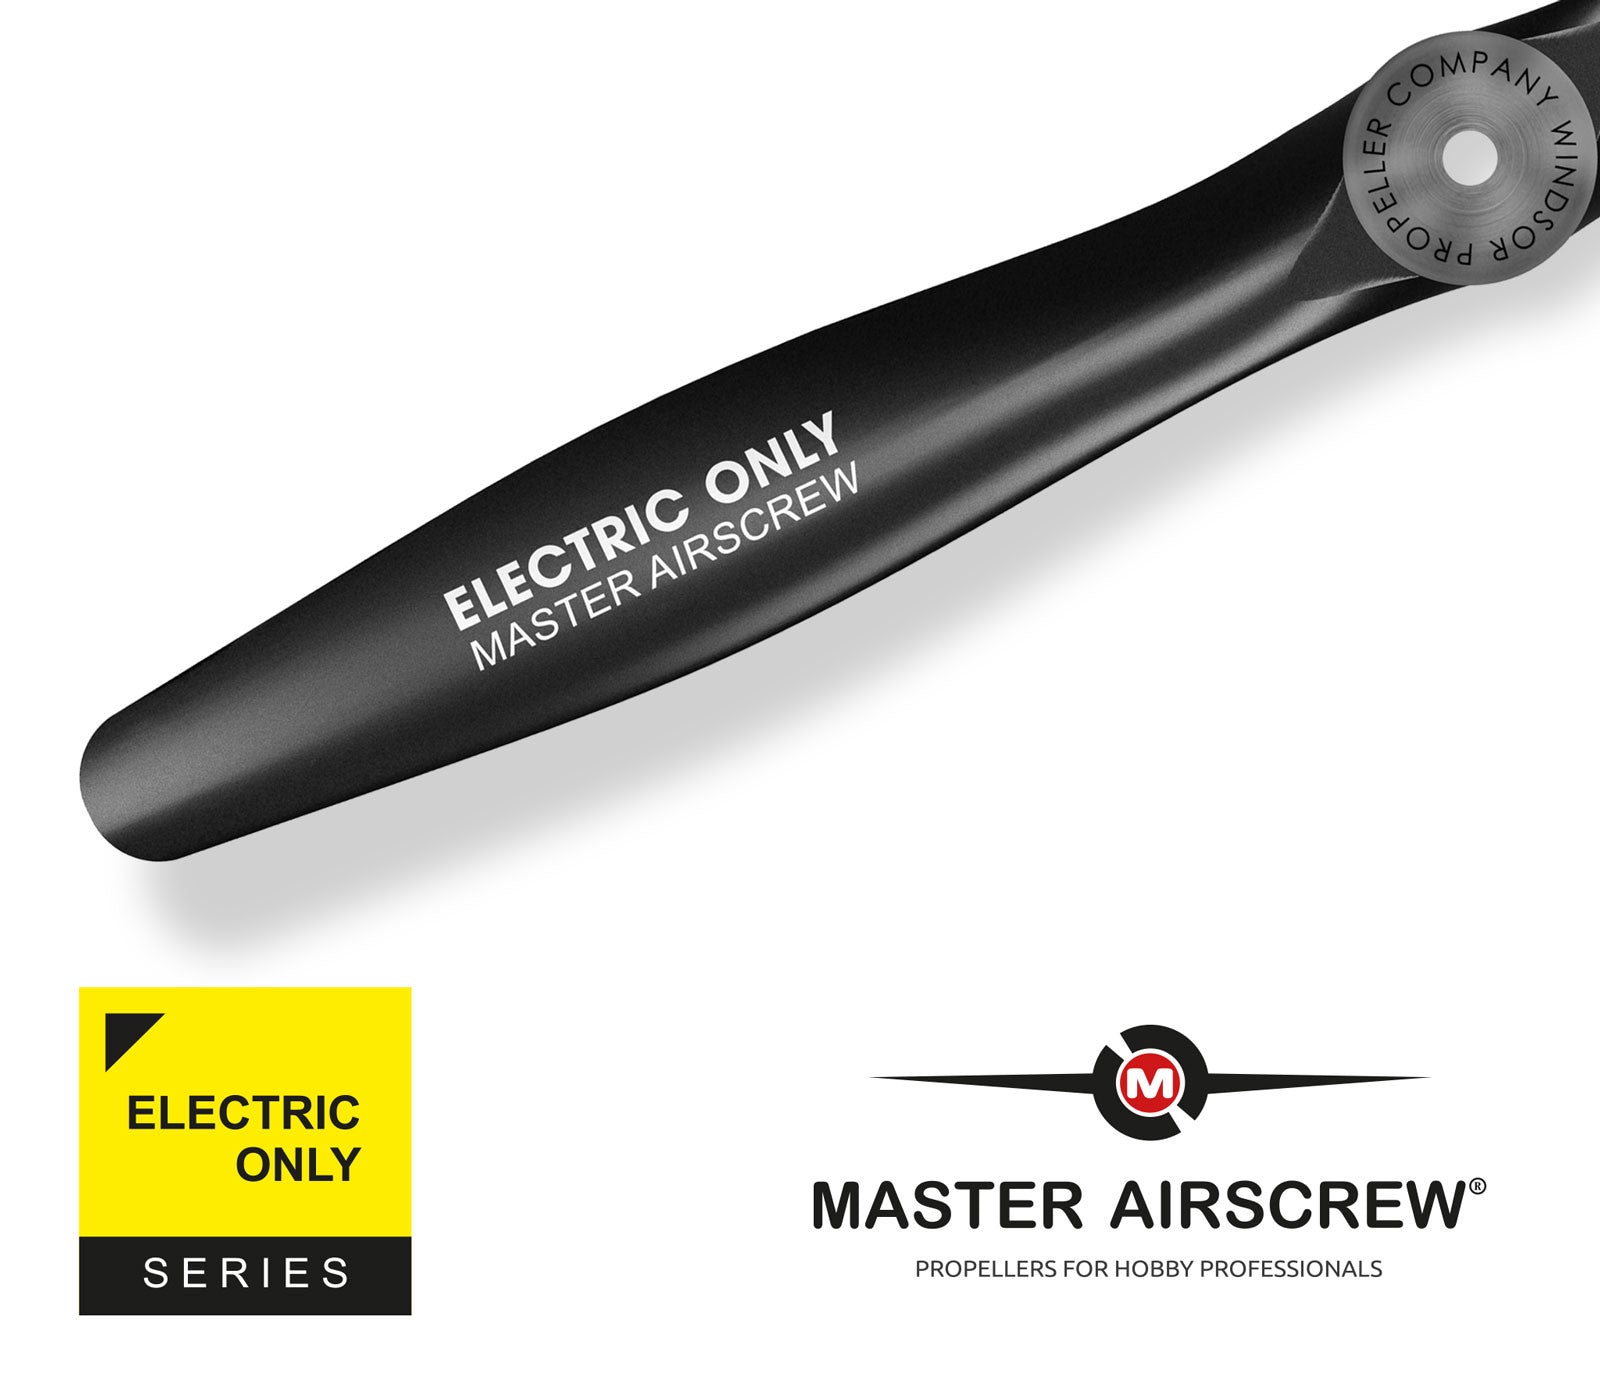 Electric Only - 7x5.5 Propeller - Master Airscrew